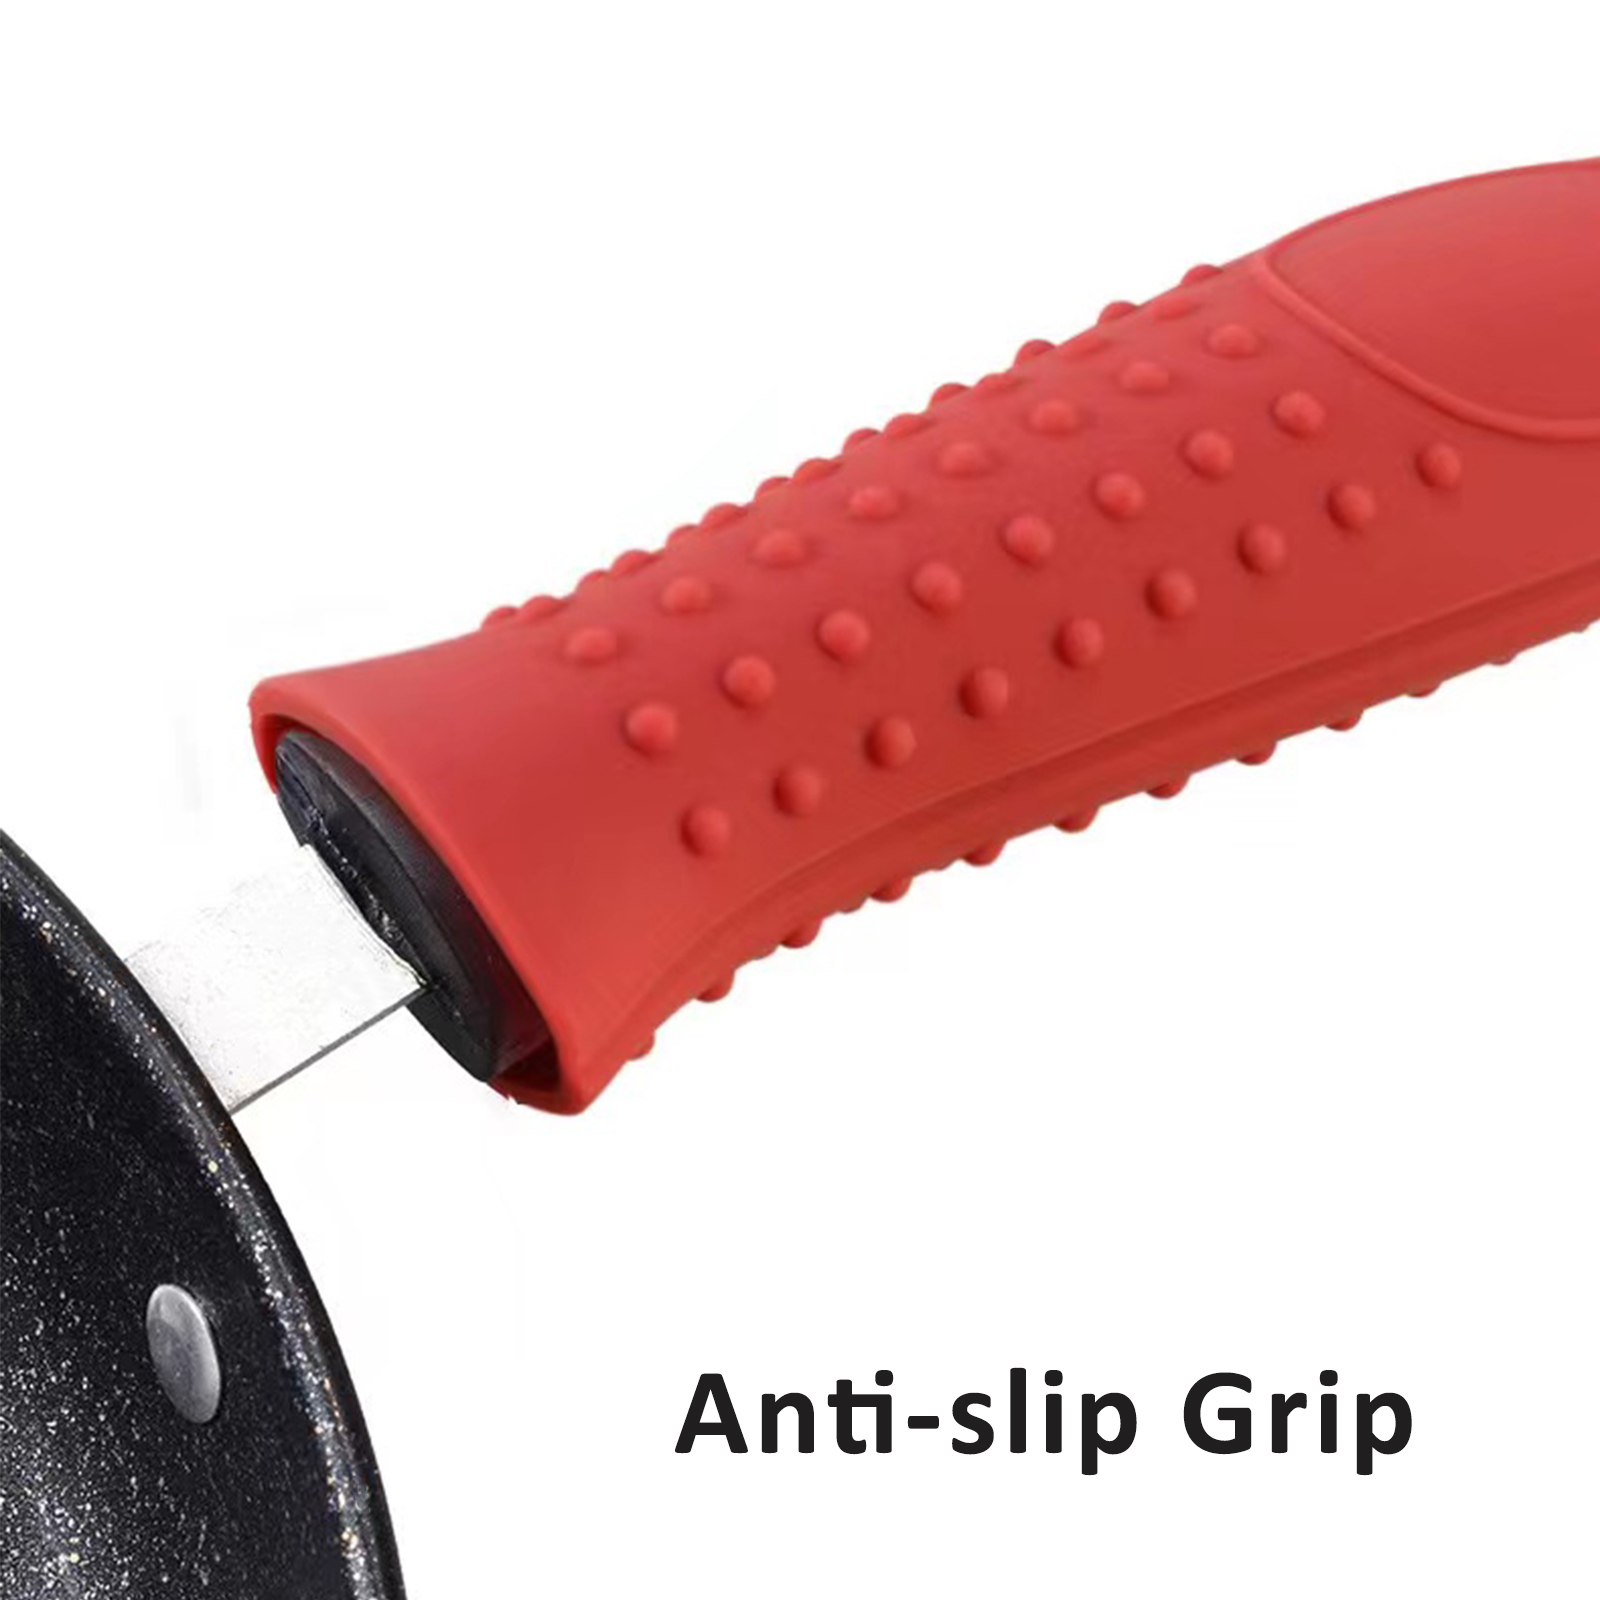 1pc Red Silicone Pot Handle Cover, Heat Resistant Anti-slip Cast